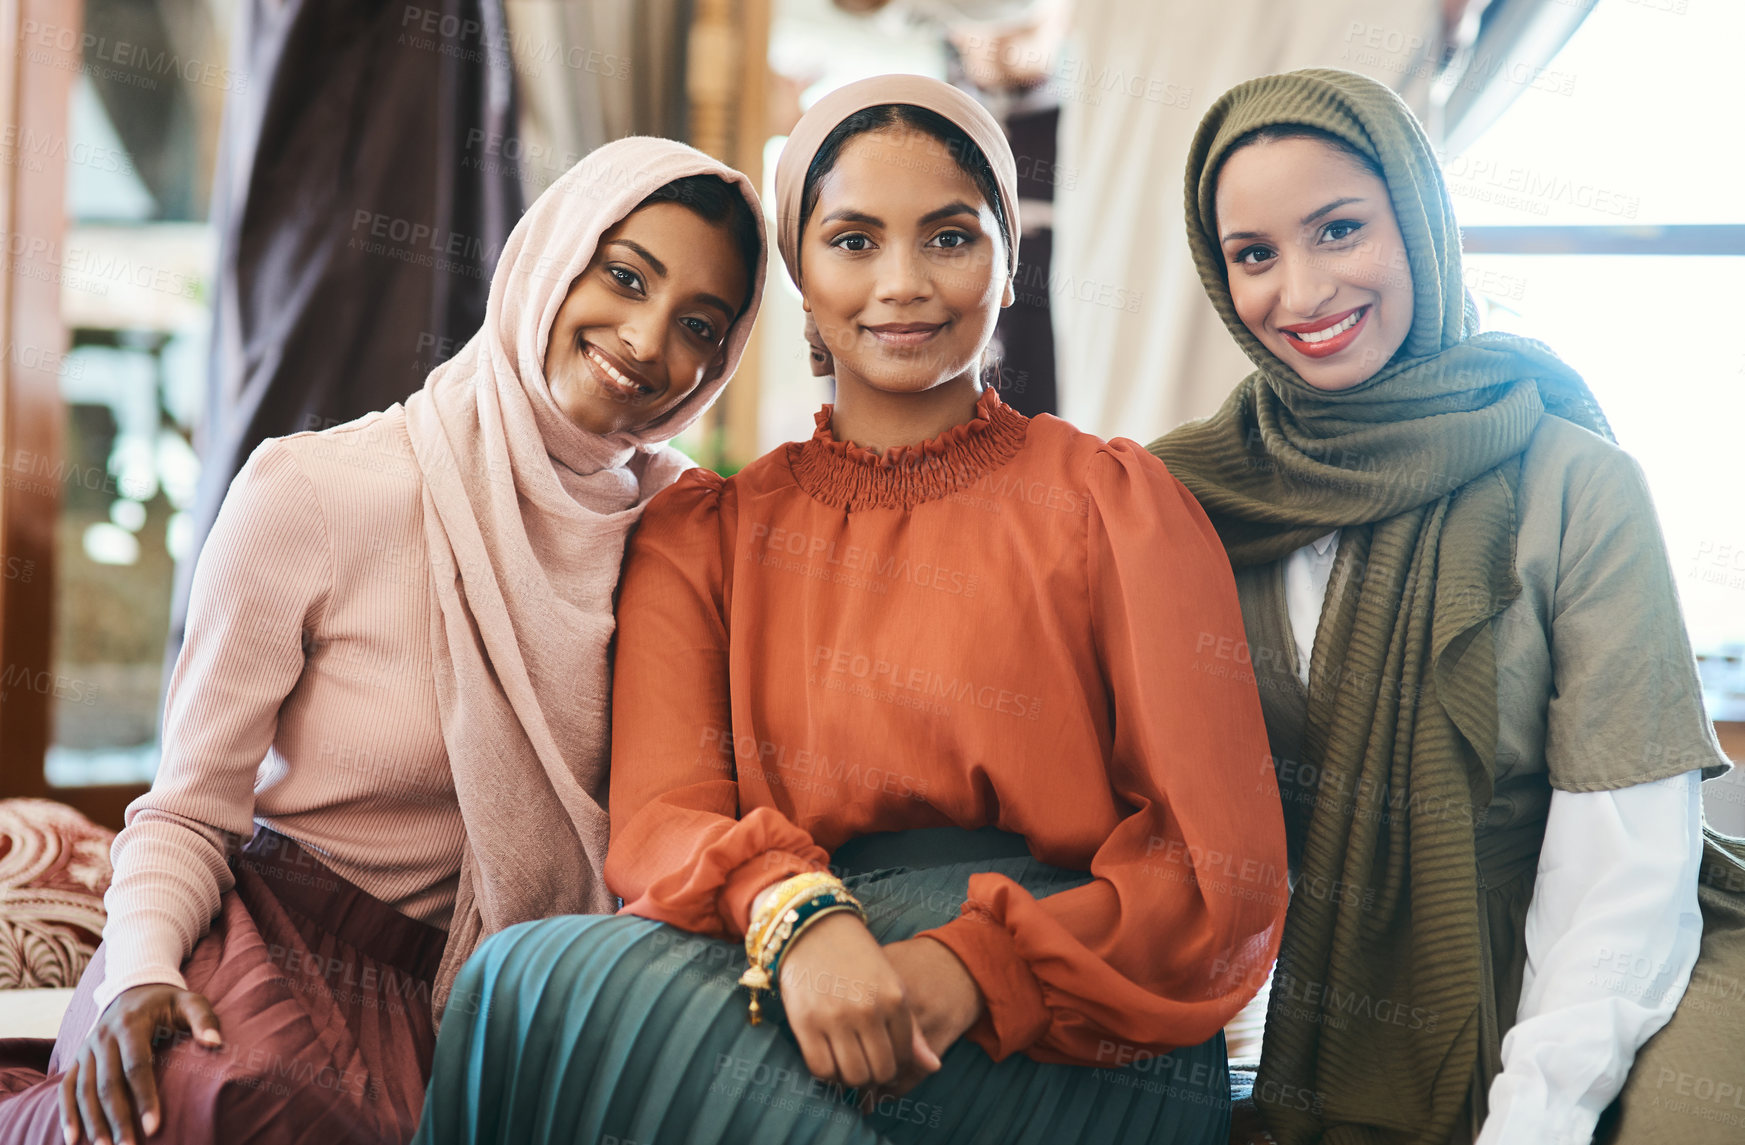 Buy stock photo Shot of a group of muslim women relaxing together